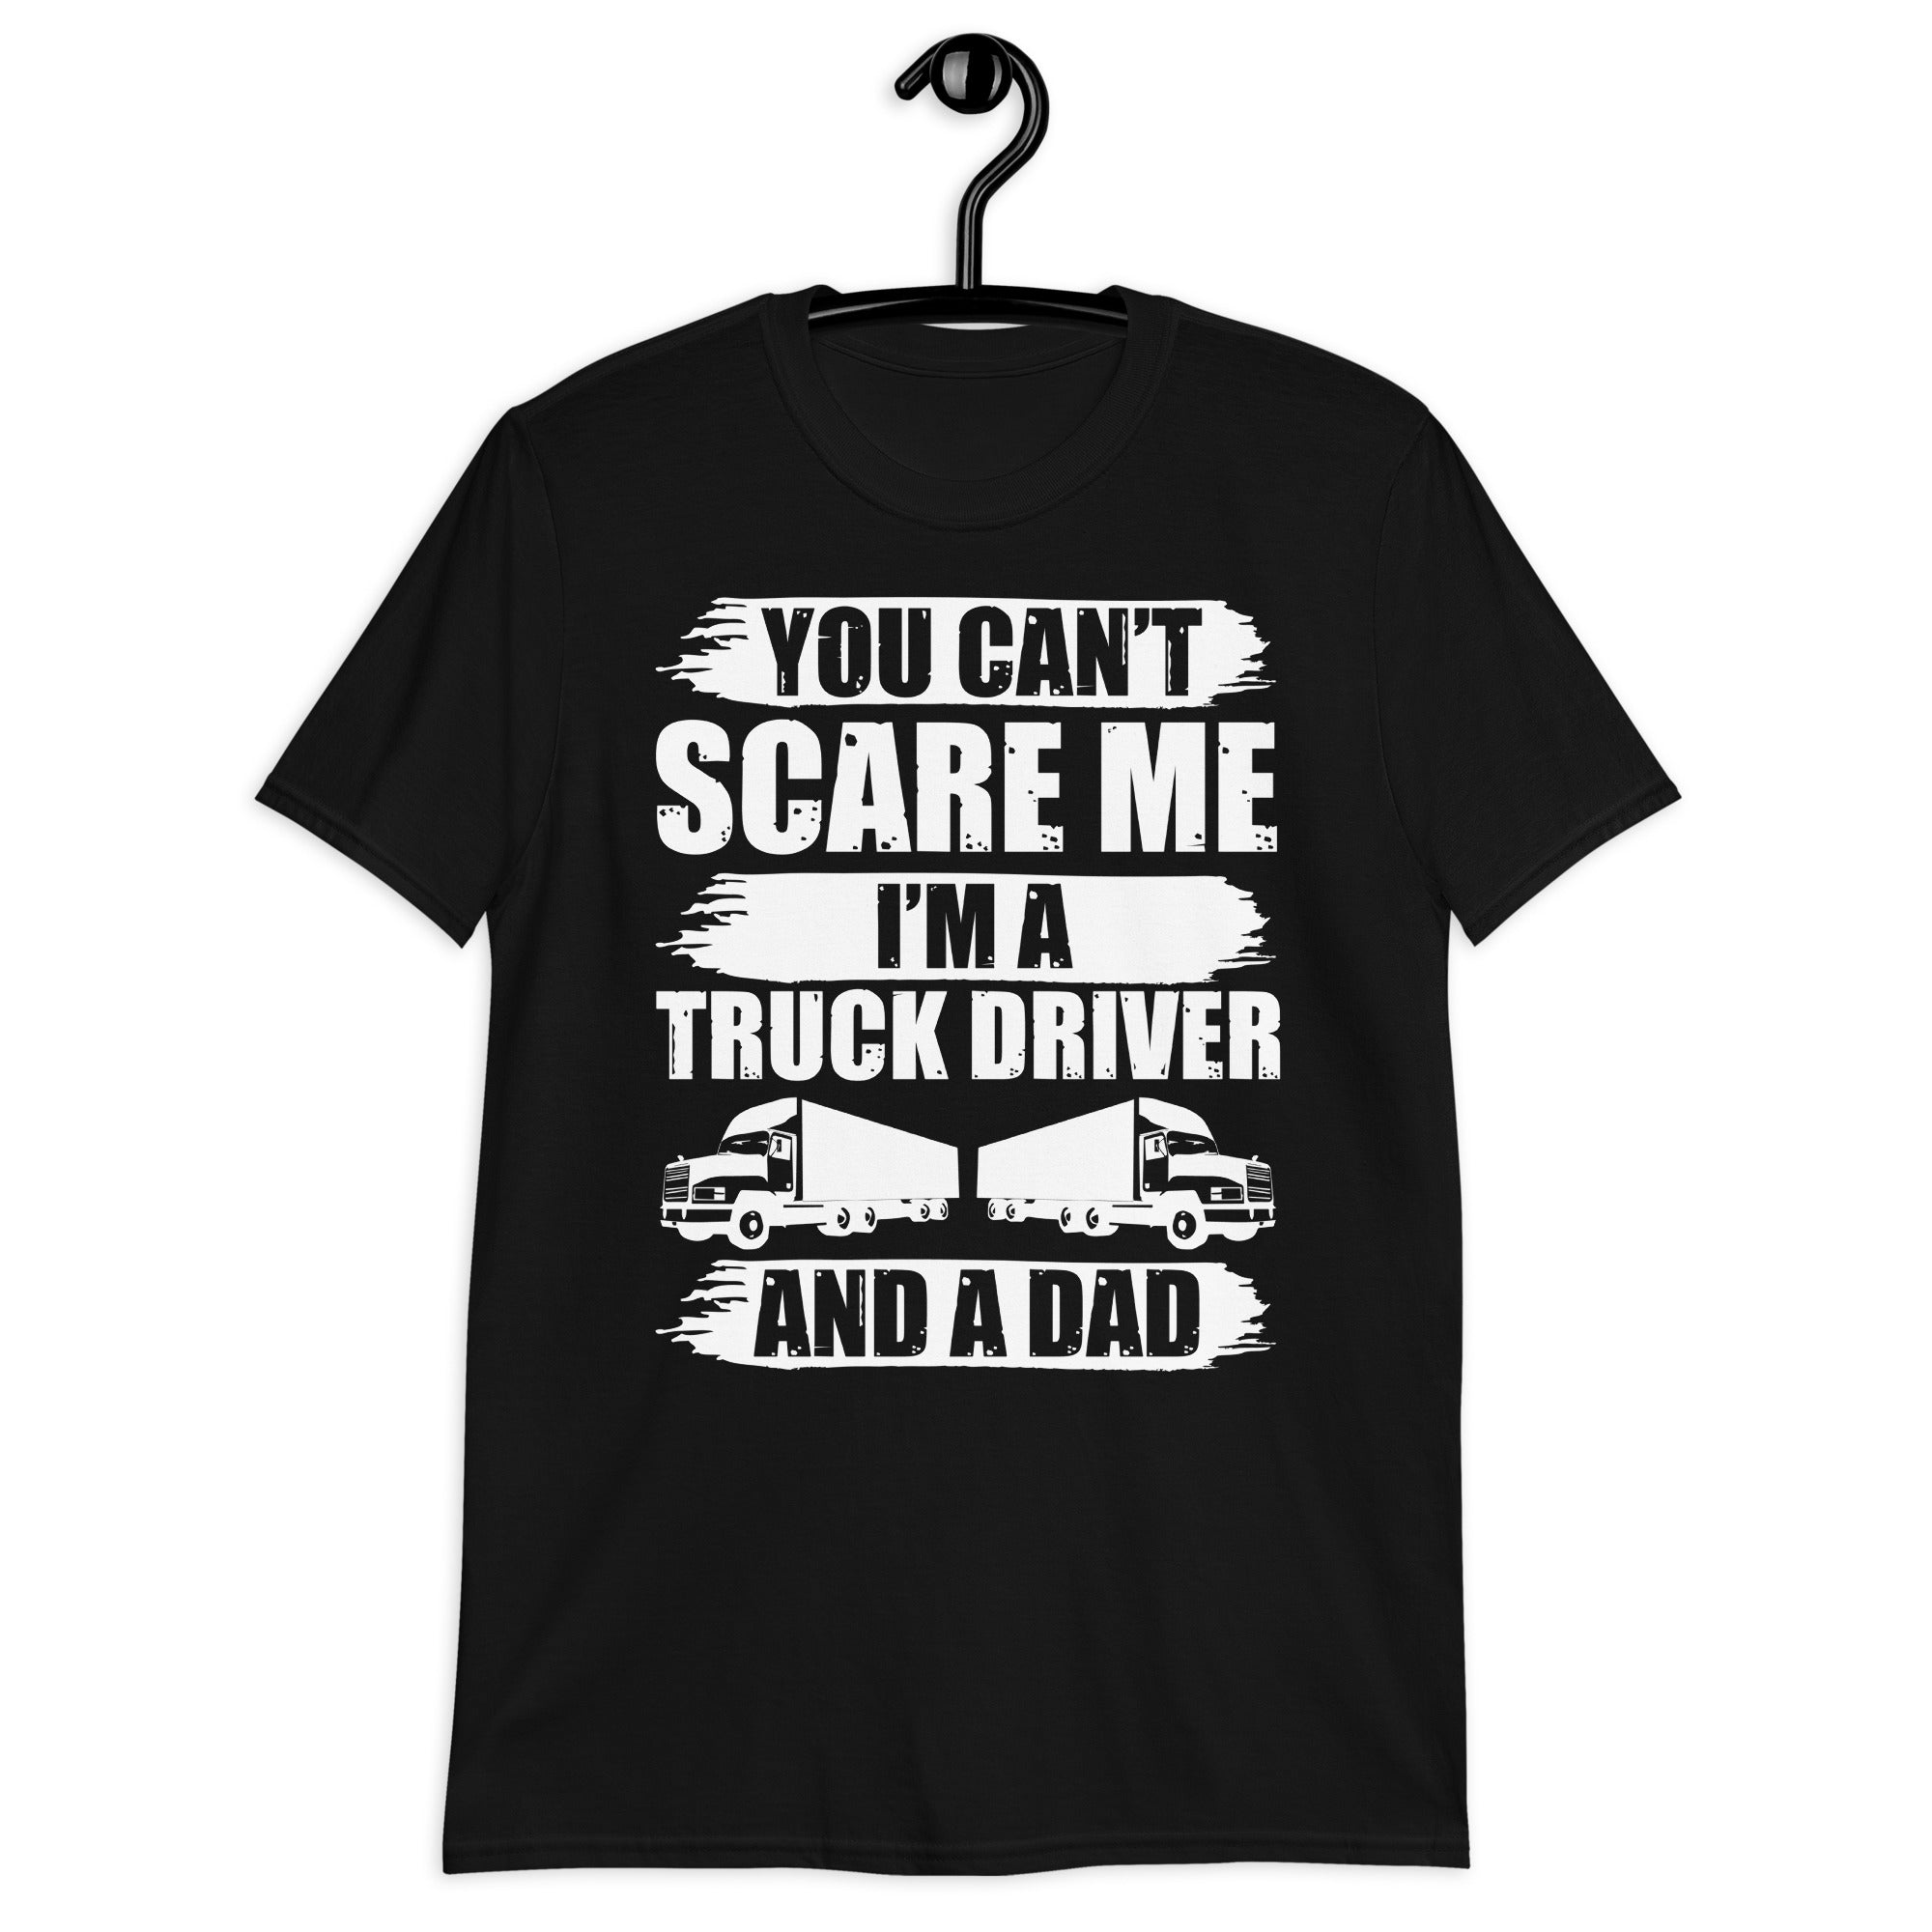 Truck Driver and Dad Funny Shirt, Funny Trucker Shirt, Truck Driver Tee, Gift For Dad, Trucker Dad Shirt, Truck Driver Gifts - Madeinsea©